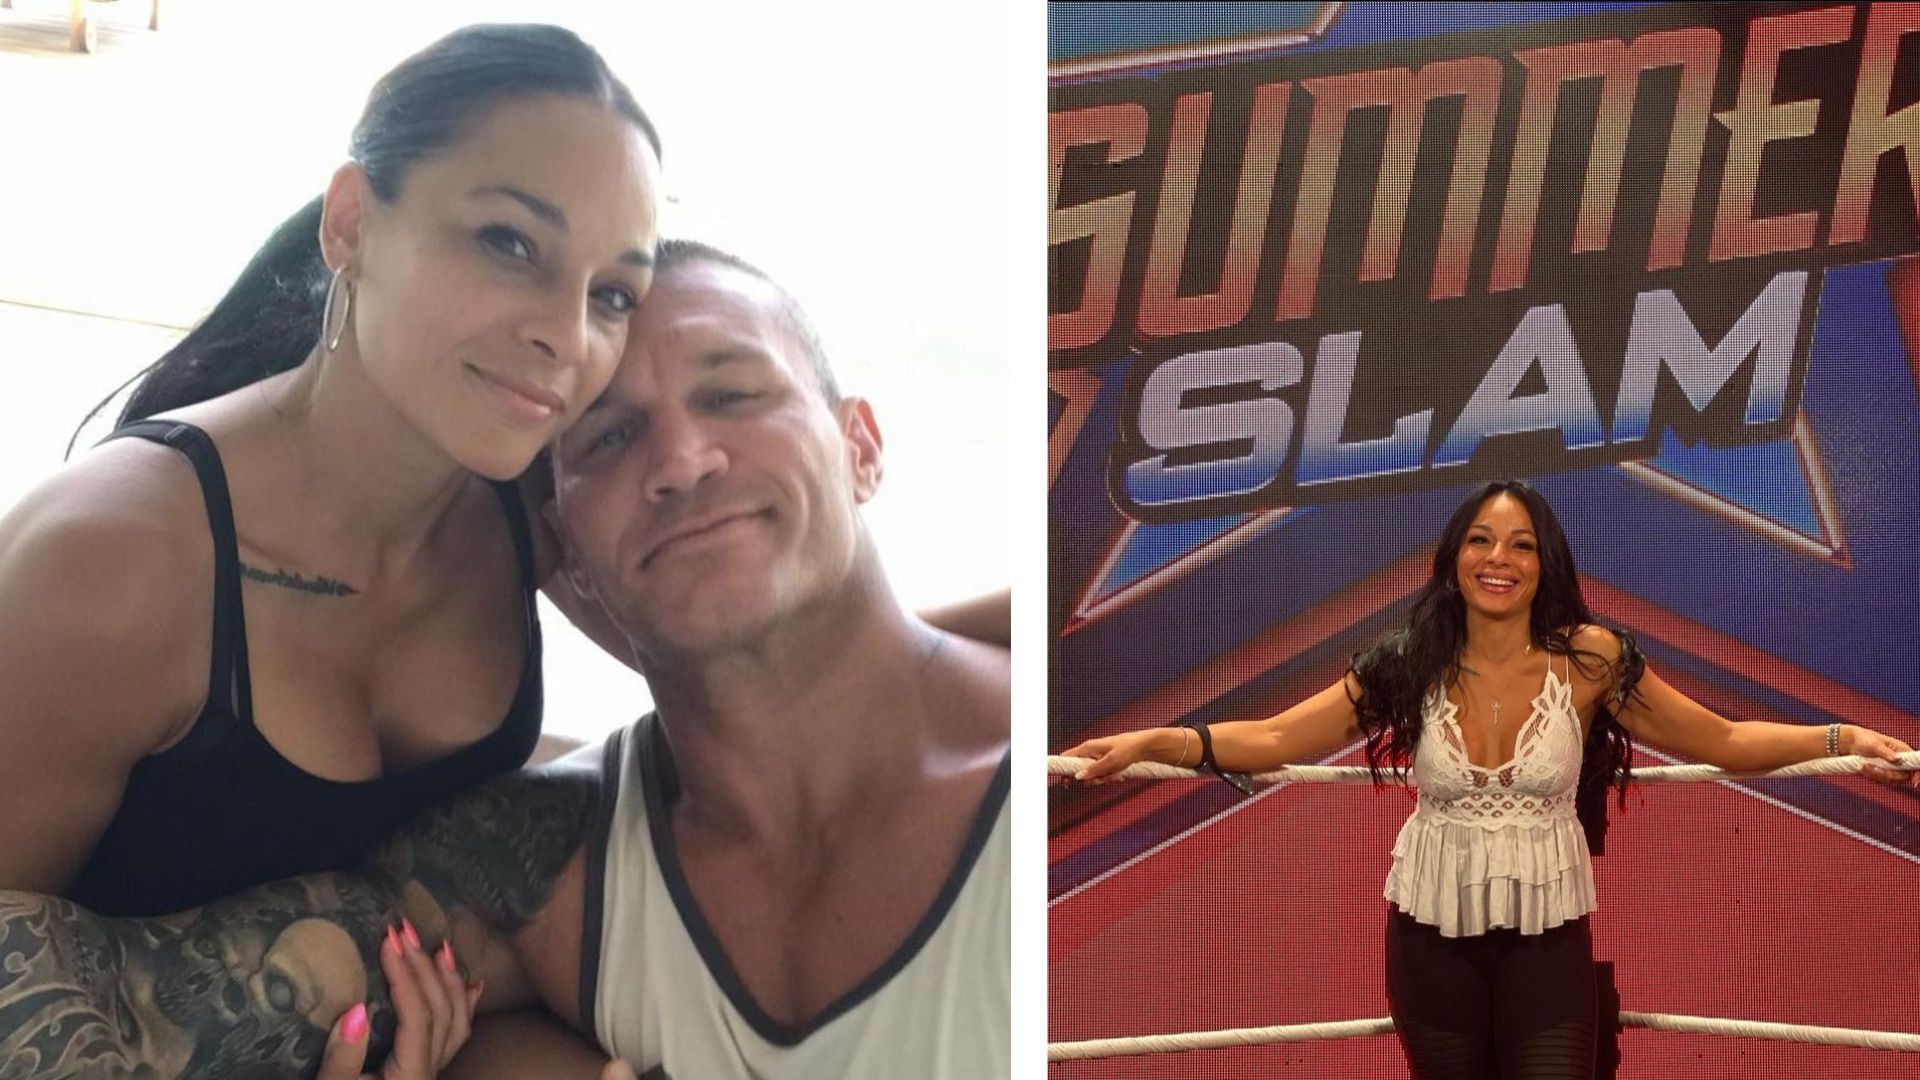 Randy Orton and his wife Kim Orton married in 2015